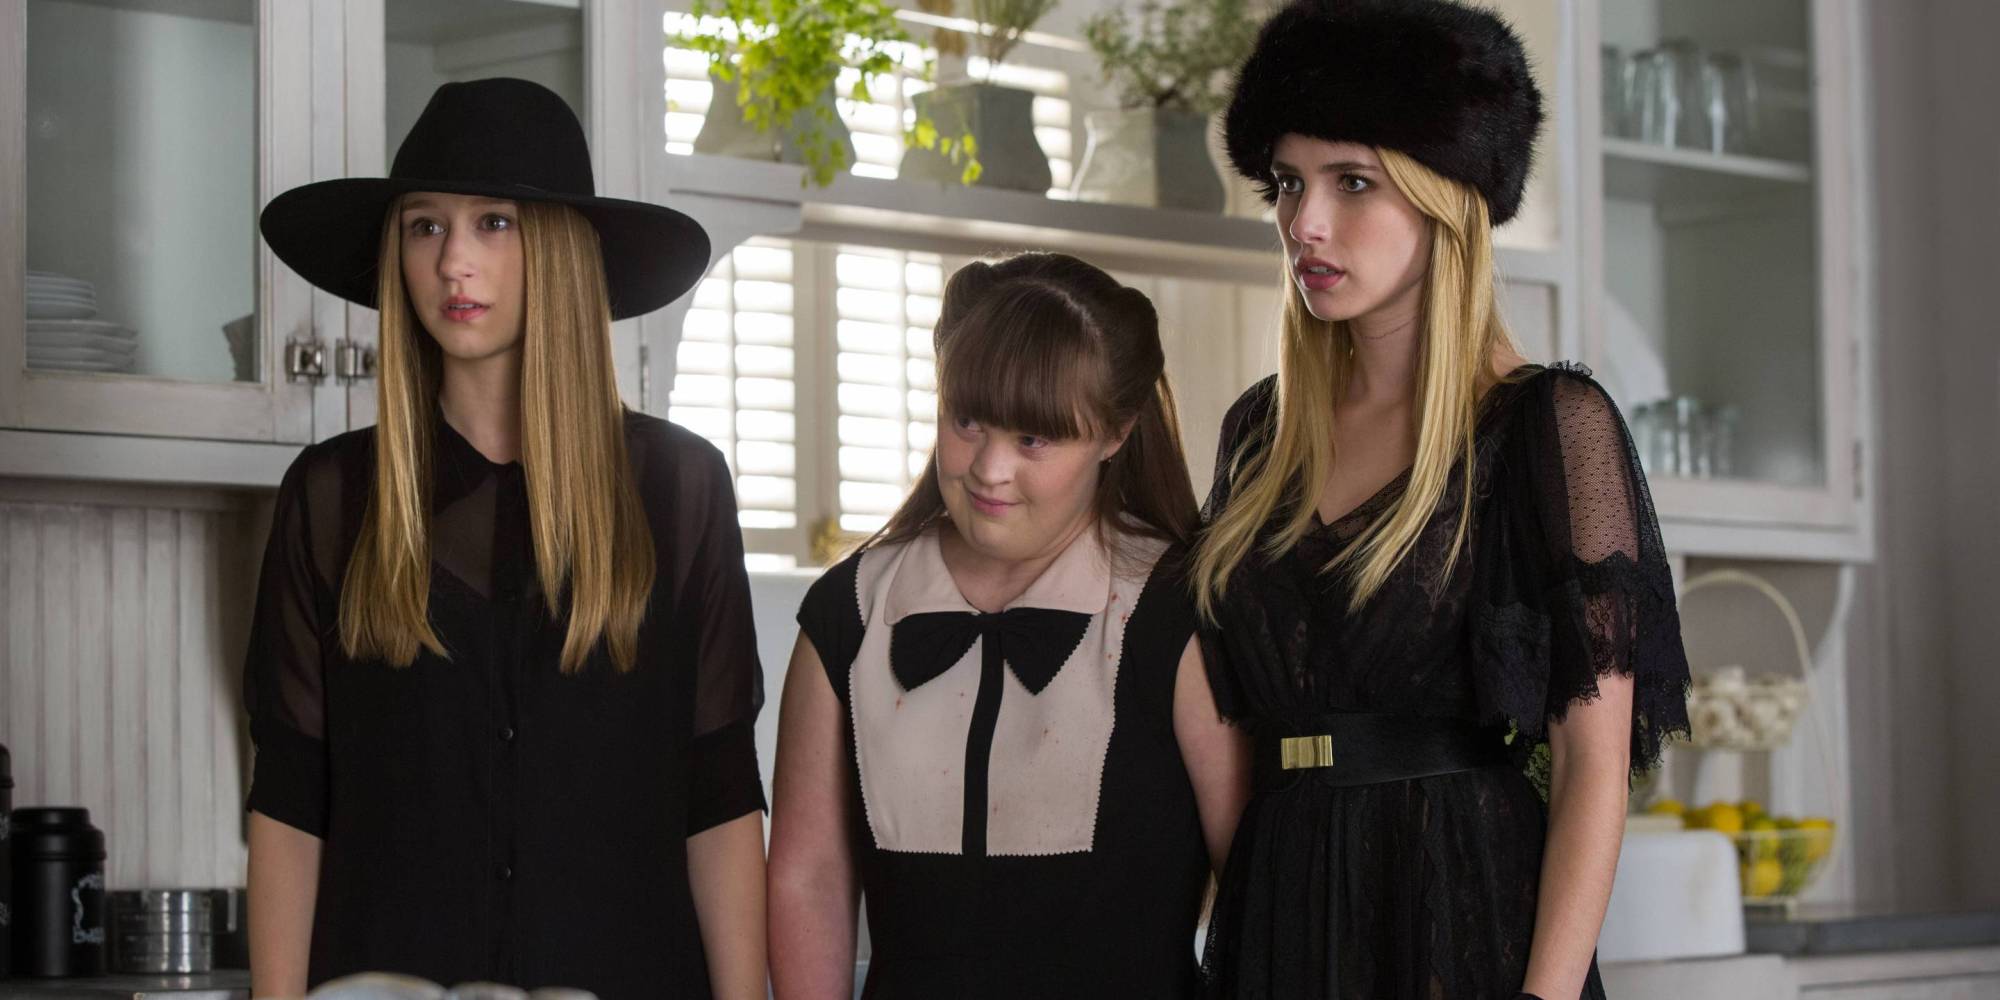 Amazing American Horror Story: Coven Pictures & Backgrounds